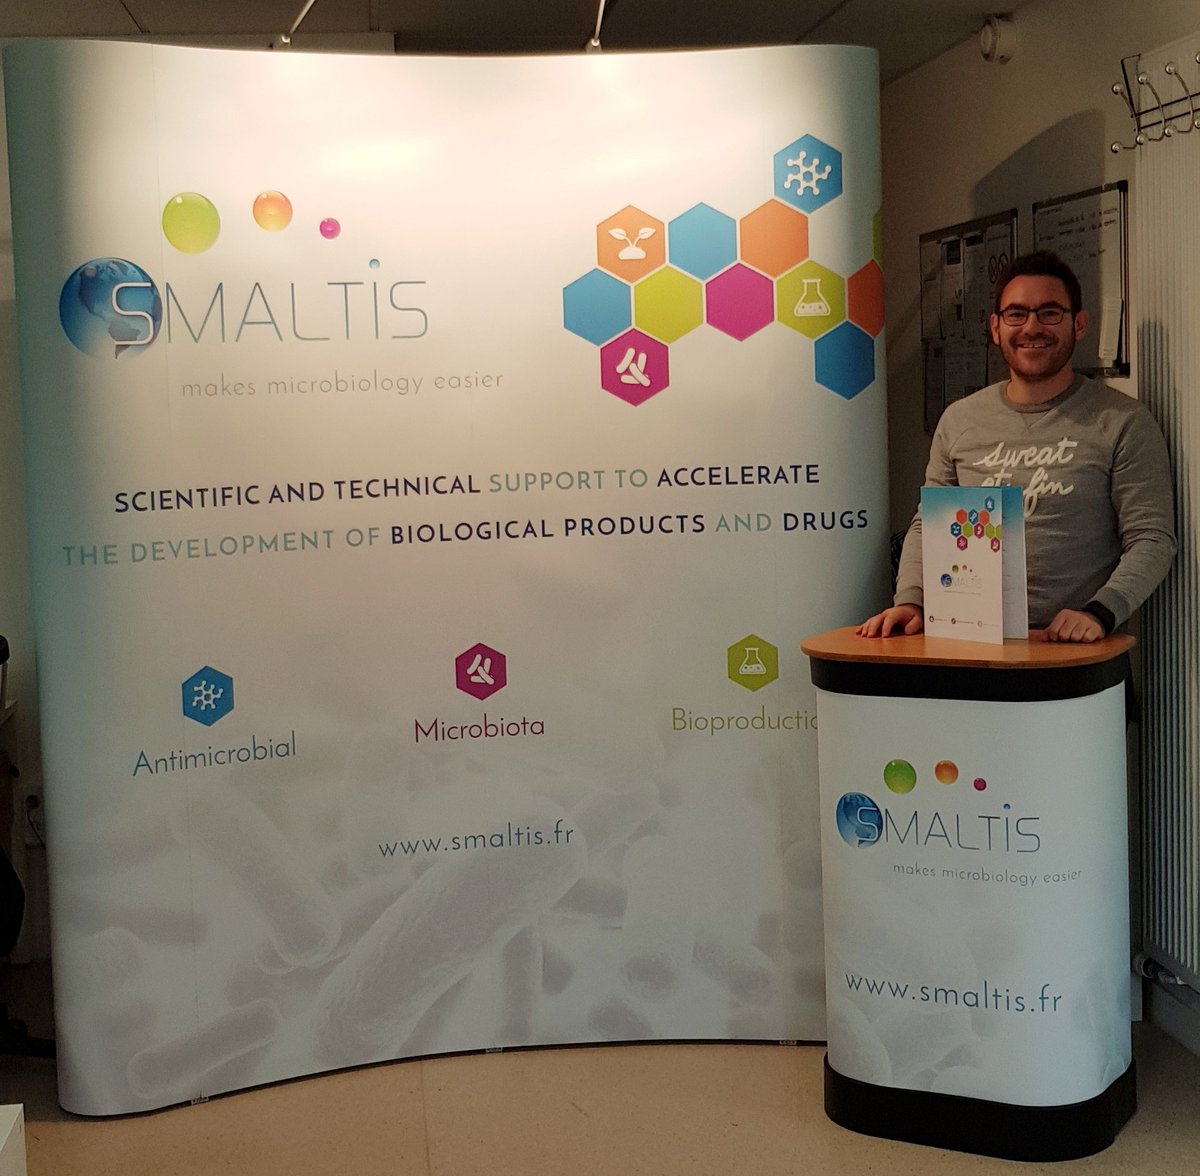 @SmaltisSas will be present at @BIOFIT_EVENT December 4, 5 at Lille and will be glad to welcome you on booth number C3/8 (hall @AFSSI_sante). #Microbiology #MolecularBiology #Lifesciences #Biofit2018 #AFSSI #SMALTIS